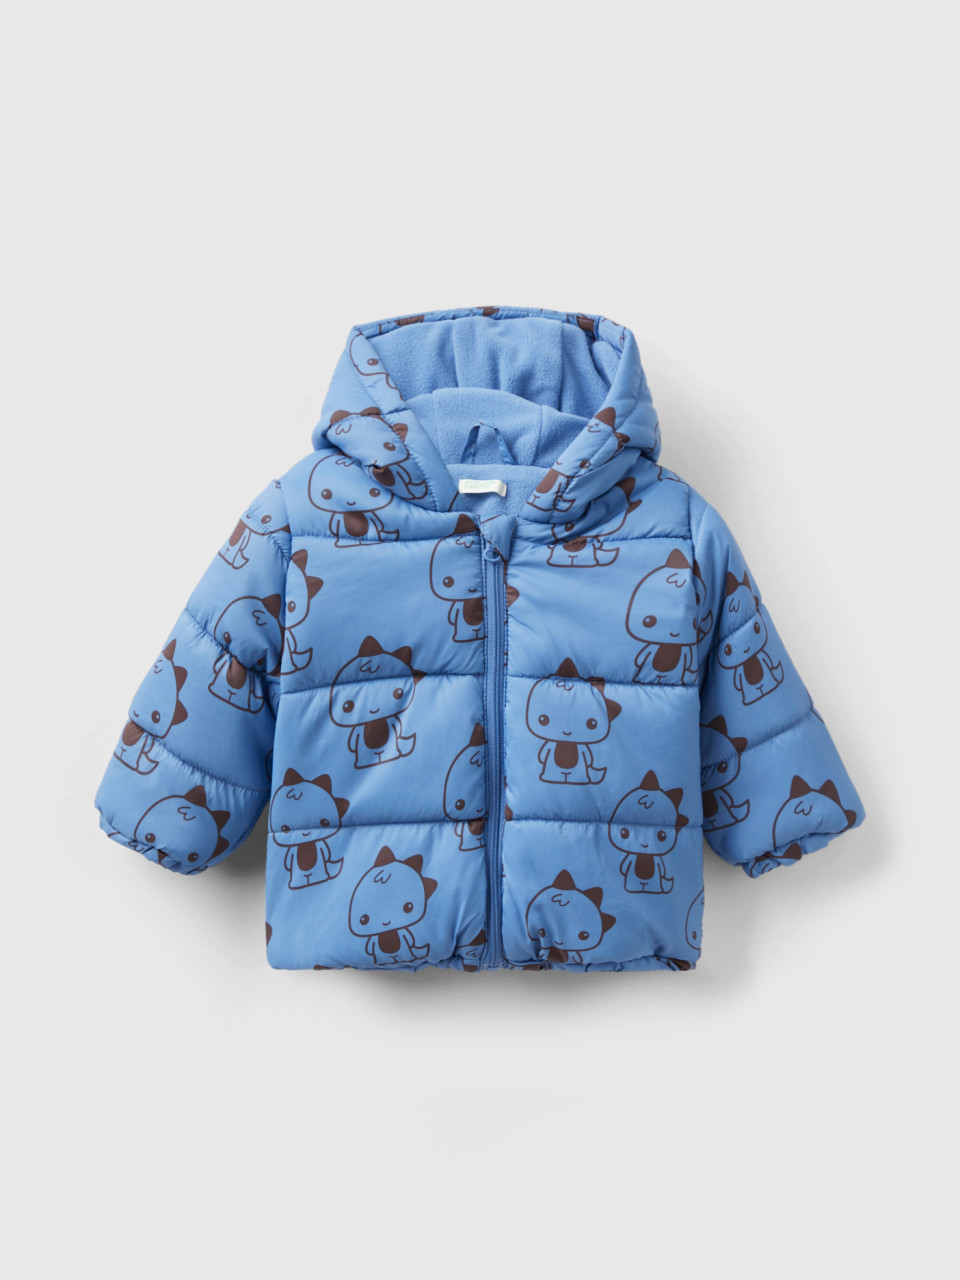 Benetton, Patterned Jacket With Zip And Hood, Light Blue, Kids